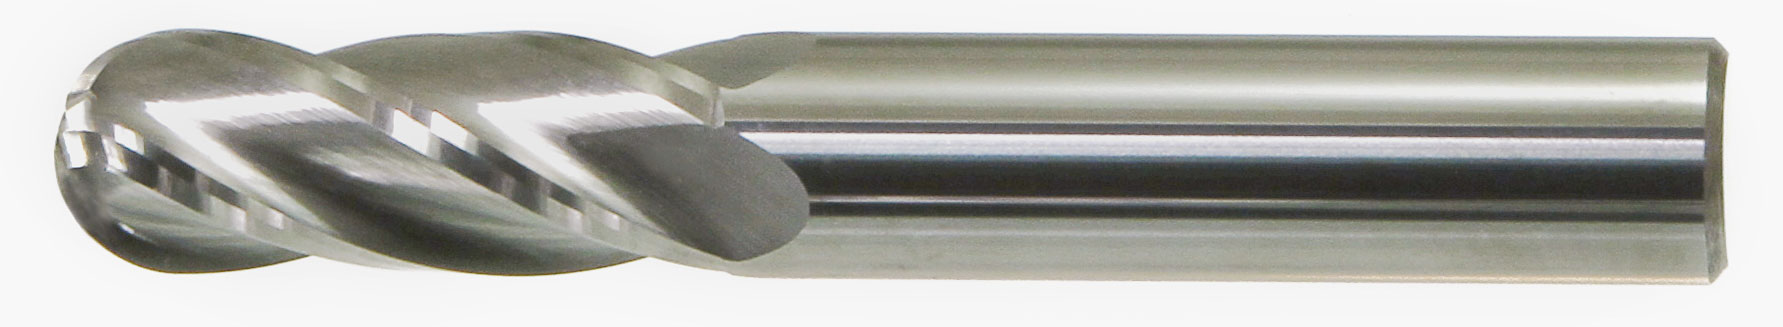 4-Flute Ball Nose End Mills - Drillco Cutting Tools